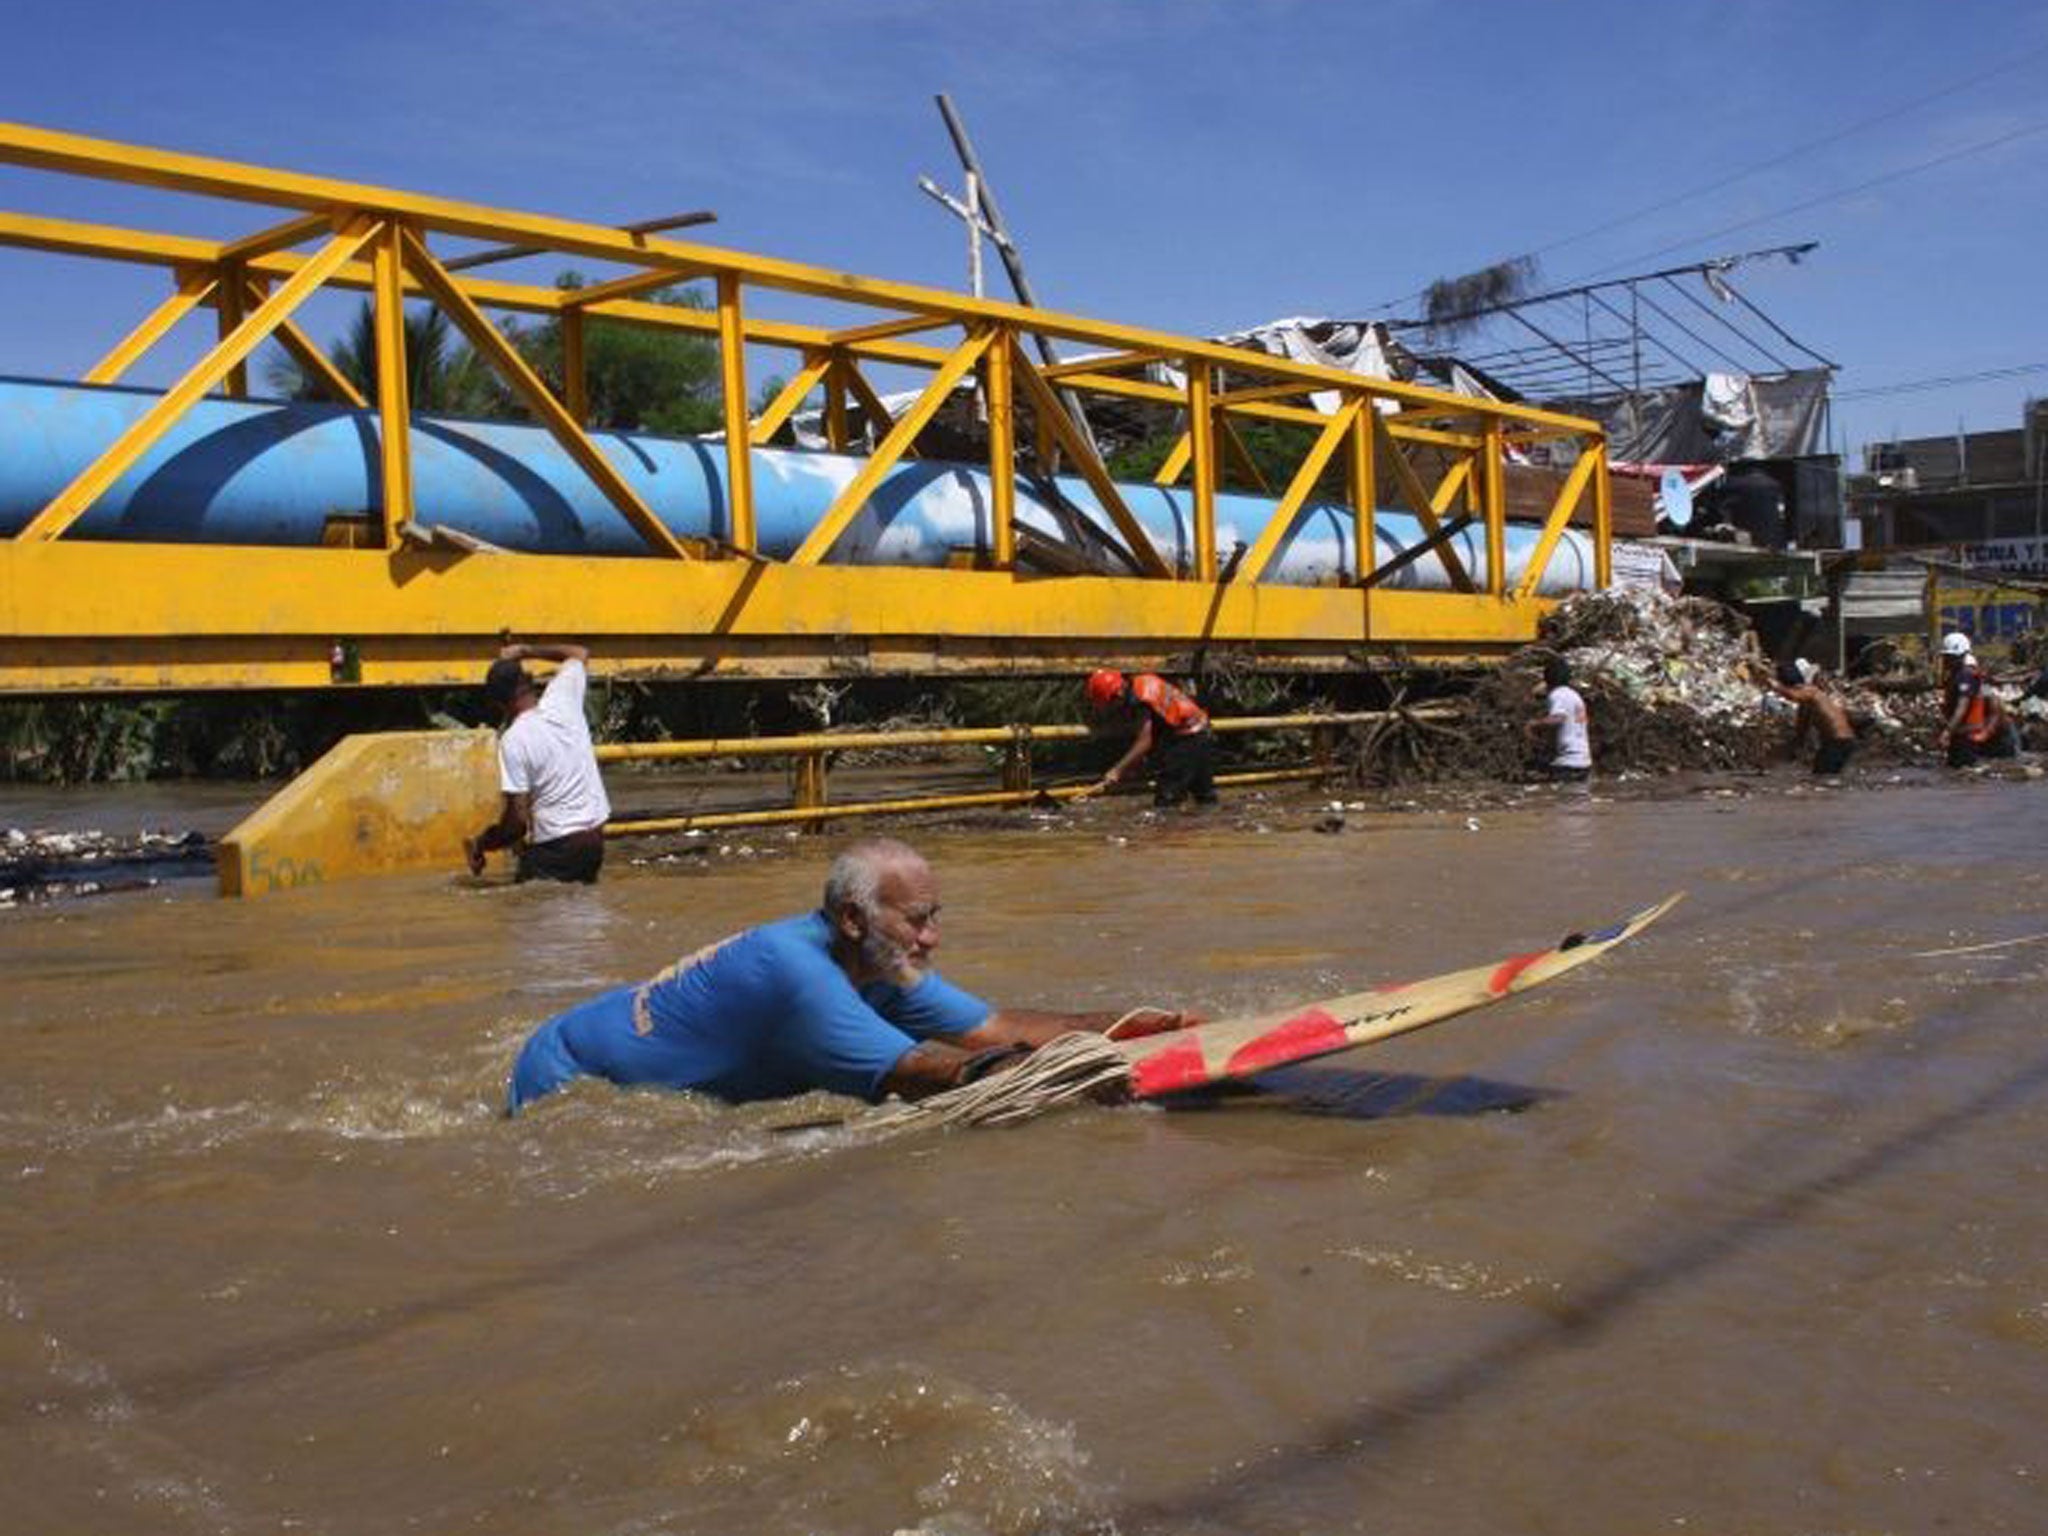 A man uses a surfboard to cross a flooded street in Acapulco